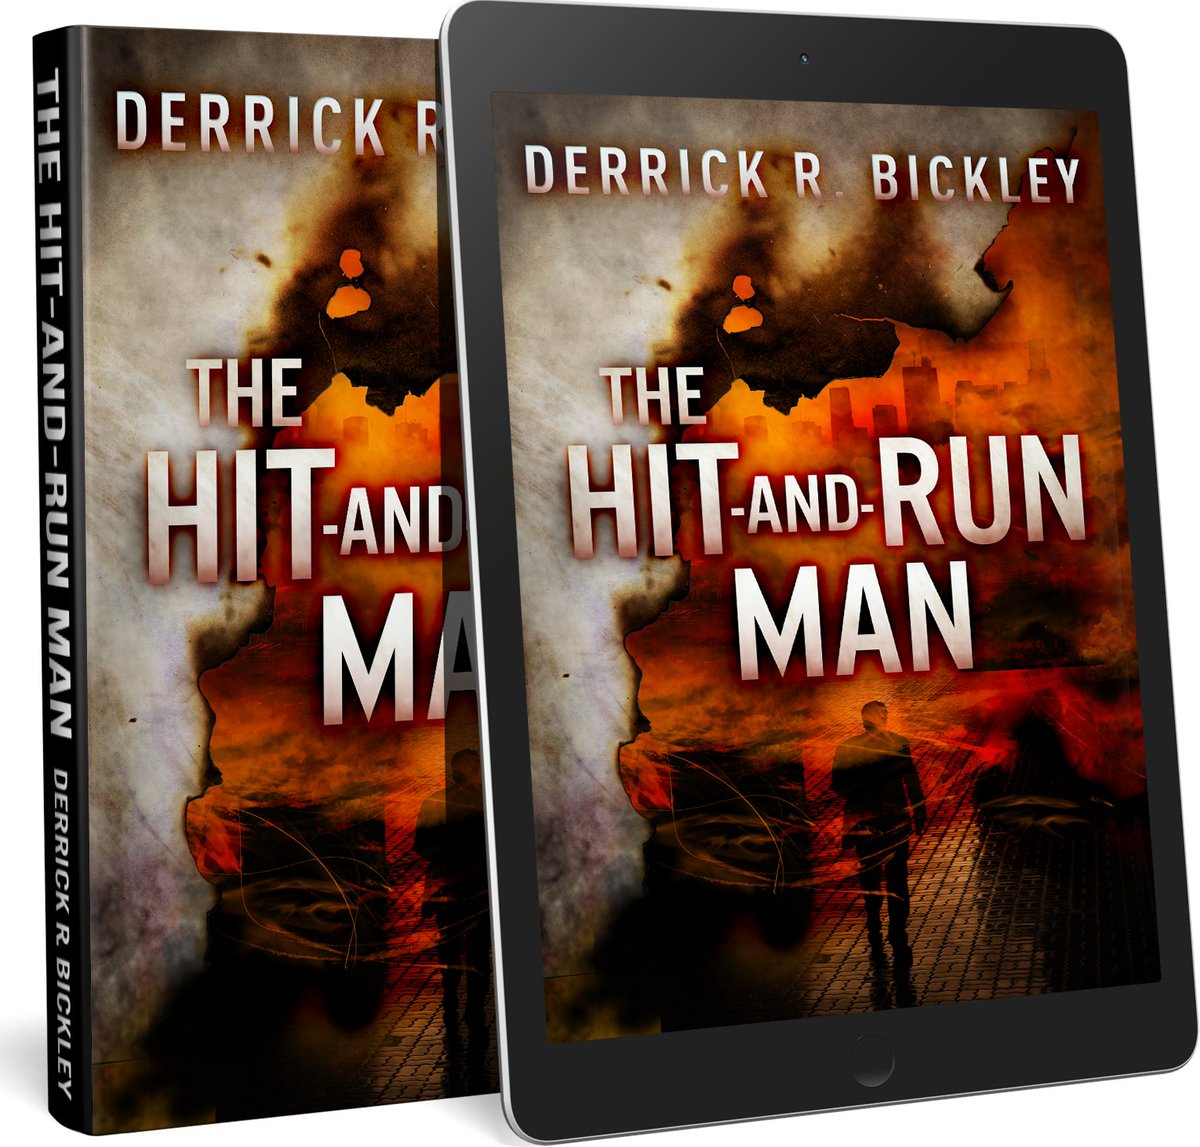 'Gripping opening and plenty of twists and turns meant I couldn't put it down' FIVE/FOUR star mybook.to/TheHitAndRunMan THE HIT-AND-RUN MAN at #Kindle or your favourite digital store PAPERBACK HARDBACK (Amzn inc L/Print B&N inc L/Print Wmart) and AUDIOBOOK #crimethrillers #crime